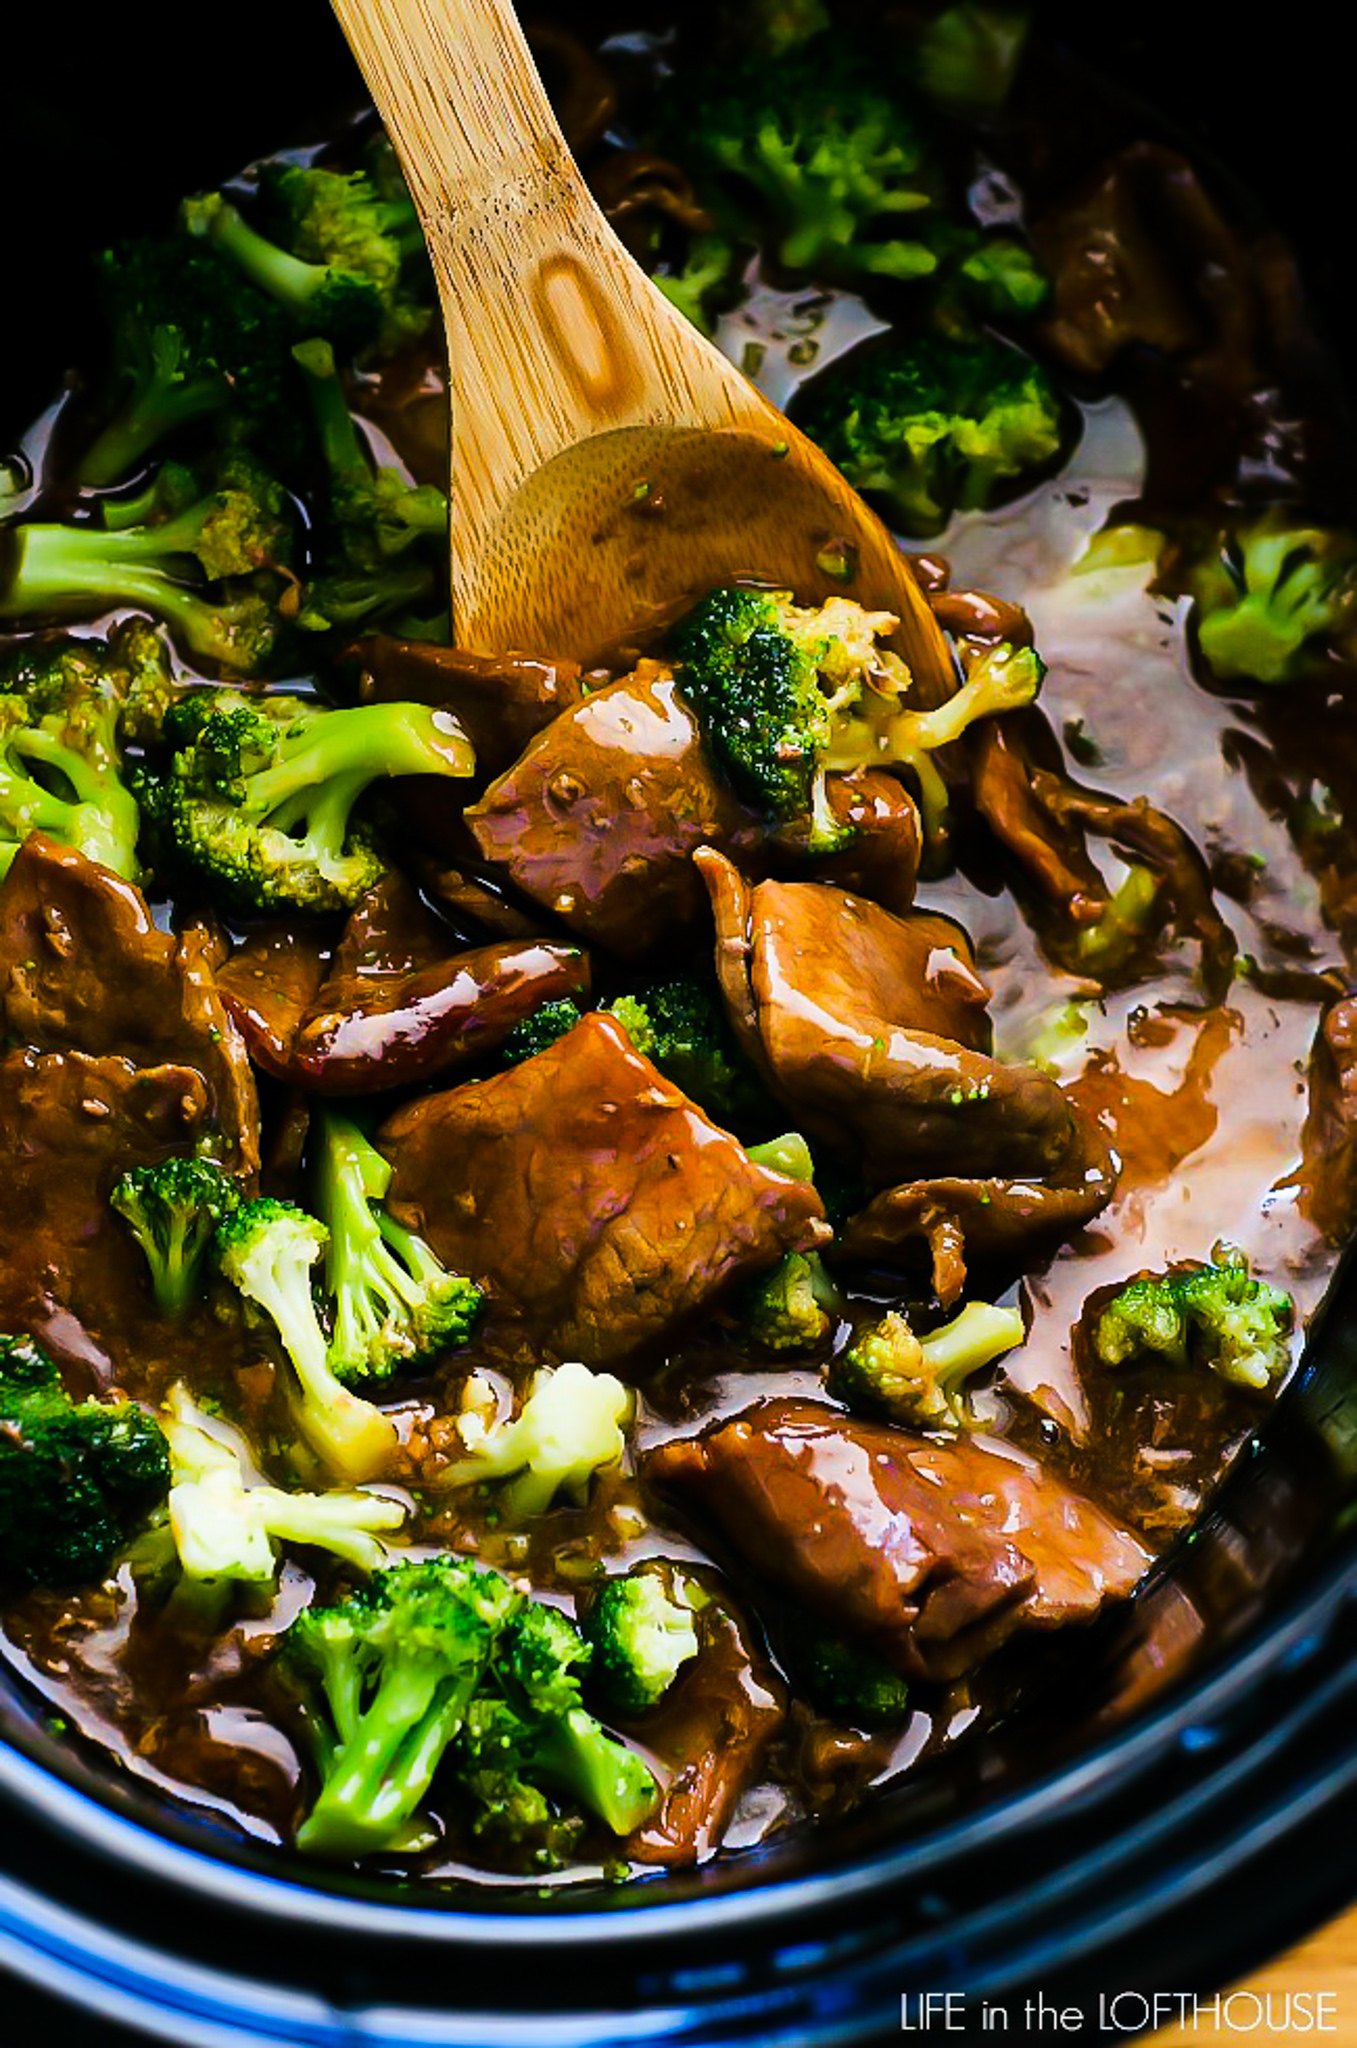 https://life-in-the-lofthouse.com/wp-content/uploads/2020/12/Crock-Pot-Beef-and-Broccoli28.jpg